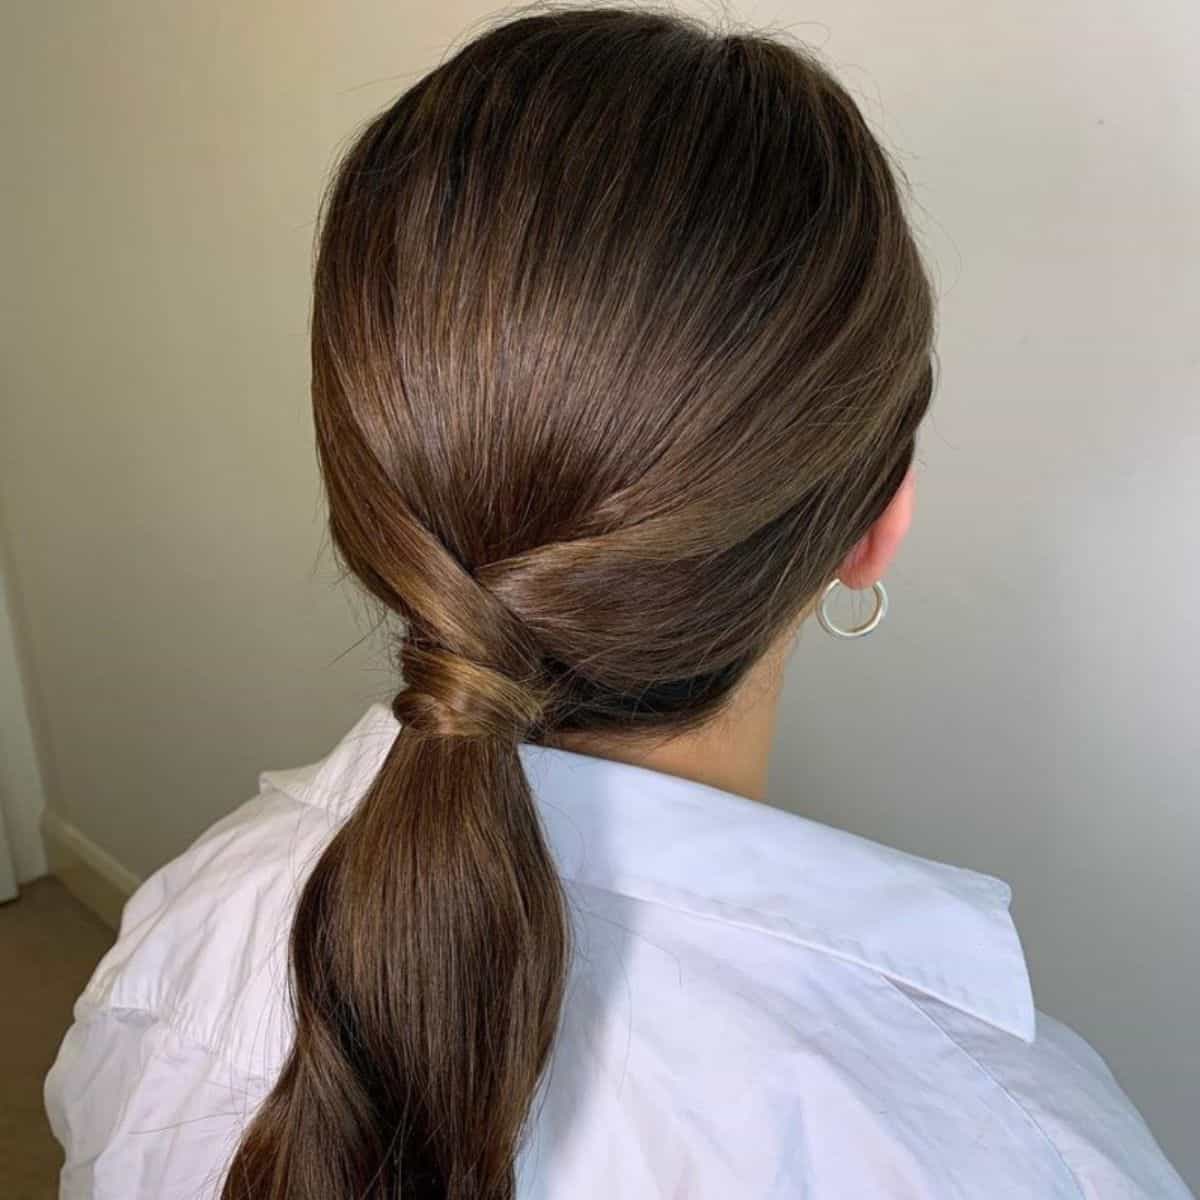 Twist Ponytail woman's hairstyle.